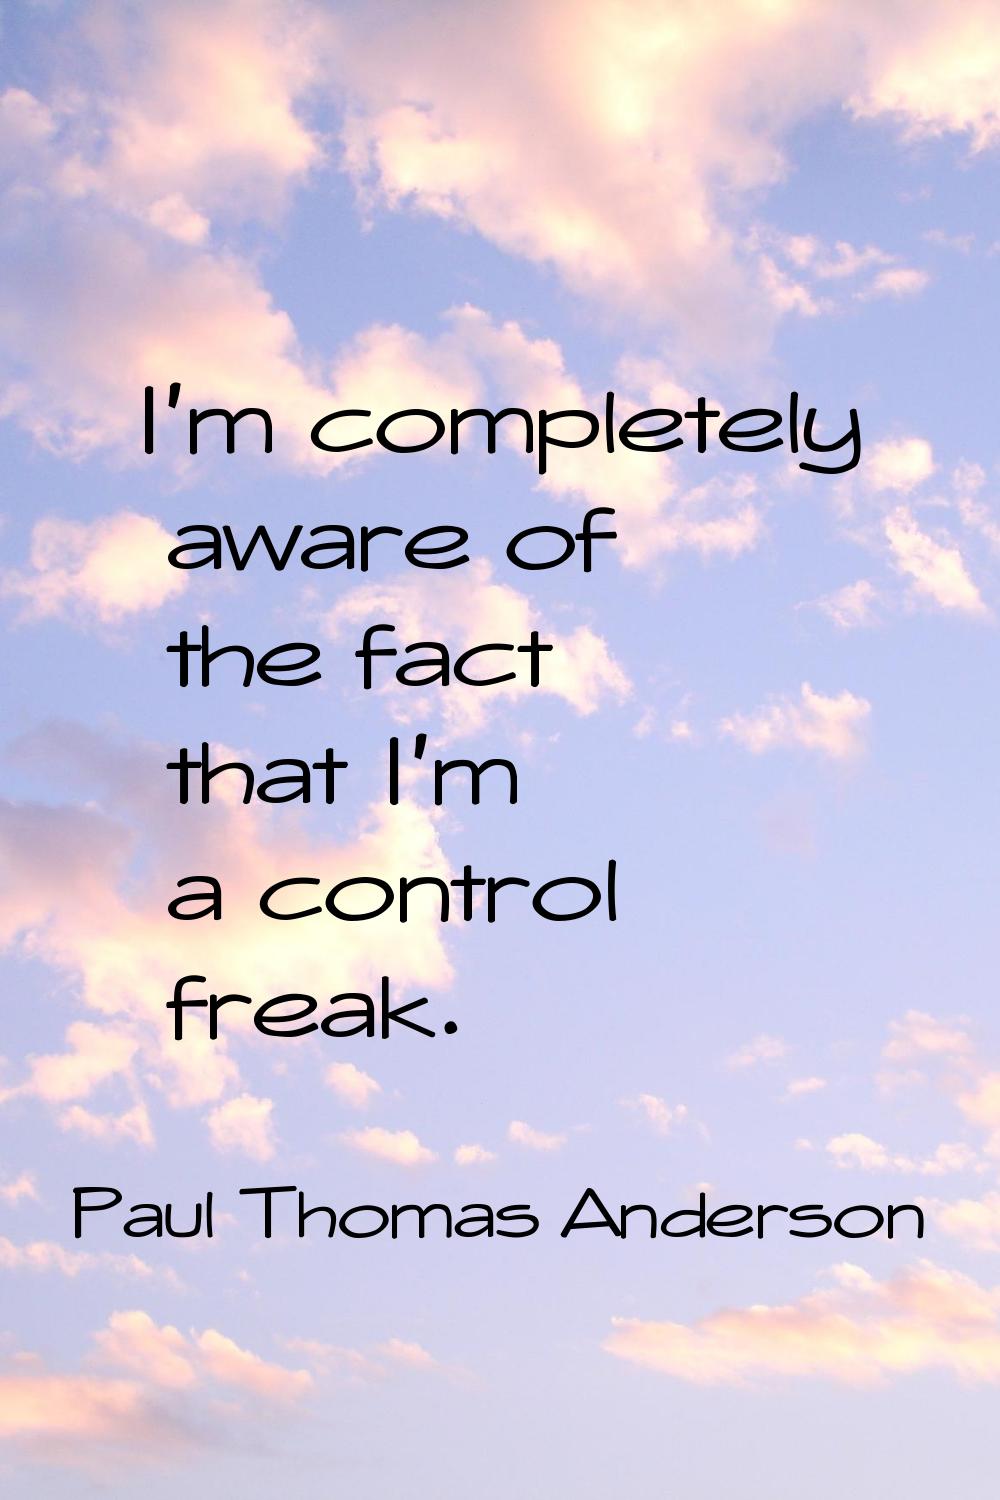 I'm completely aware of the fact that I'm a control freak.